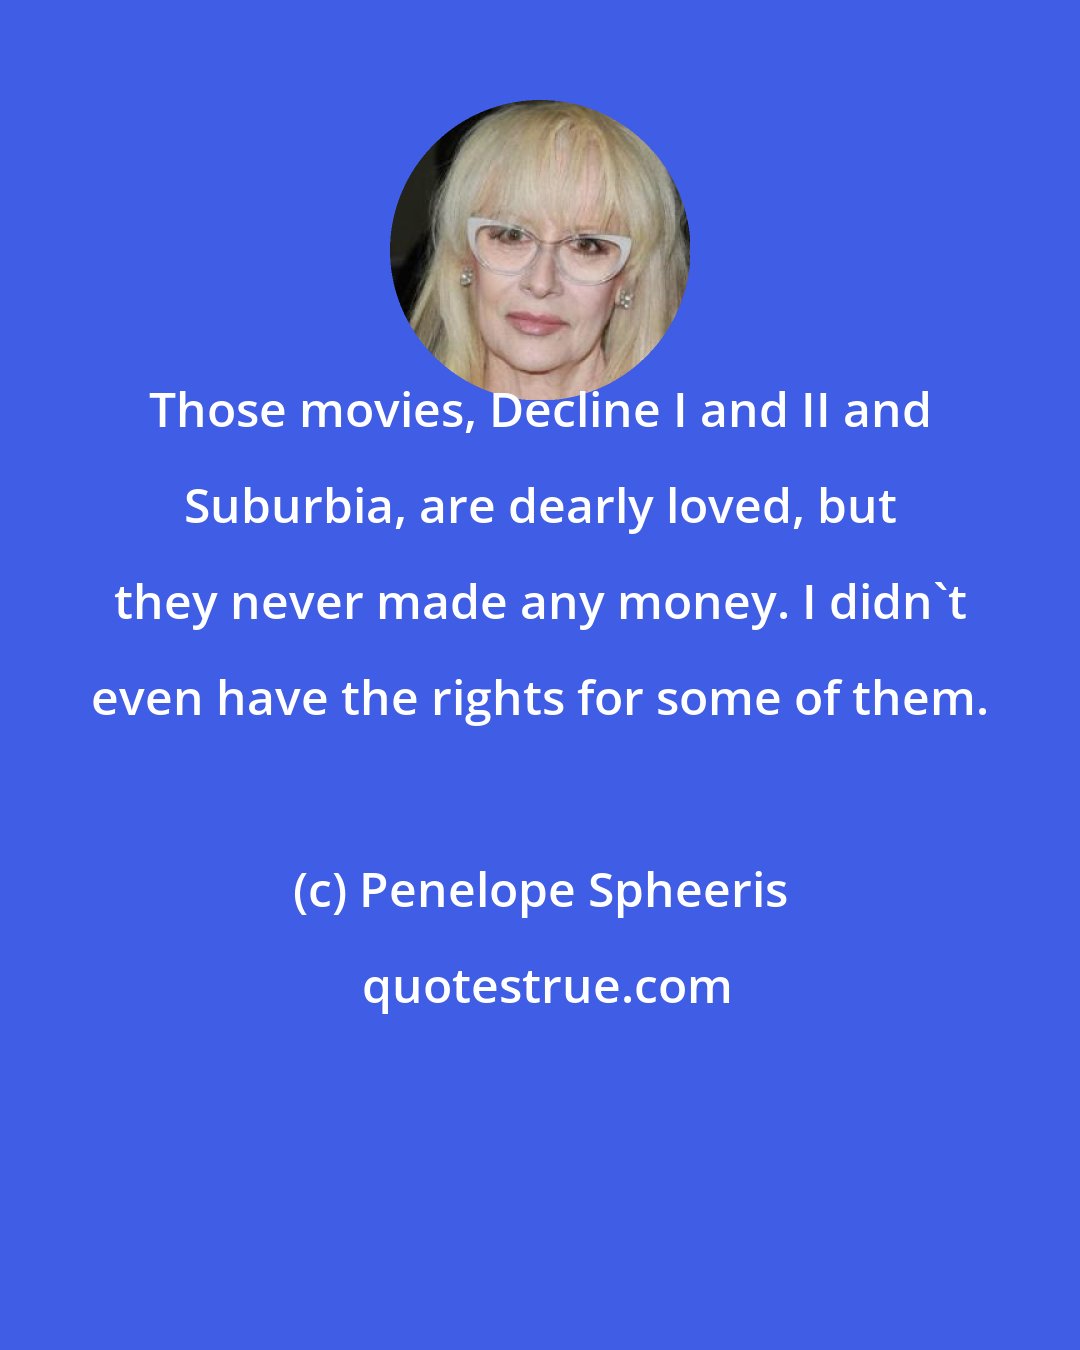 Penelope Spheeris: Those movies, Decline I and II and Suburbia, are dearly loved, but they never made any money. I didn't even have the rights for some of them.